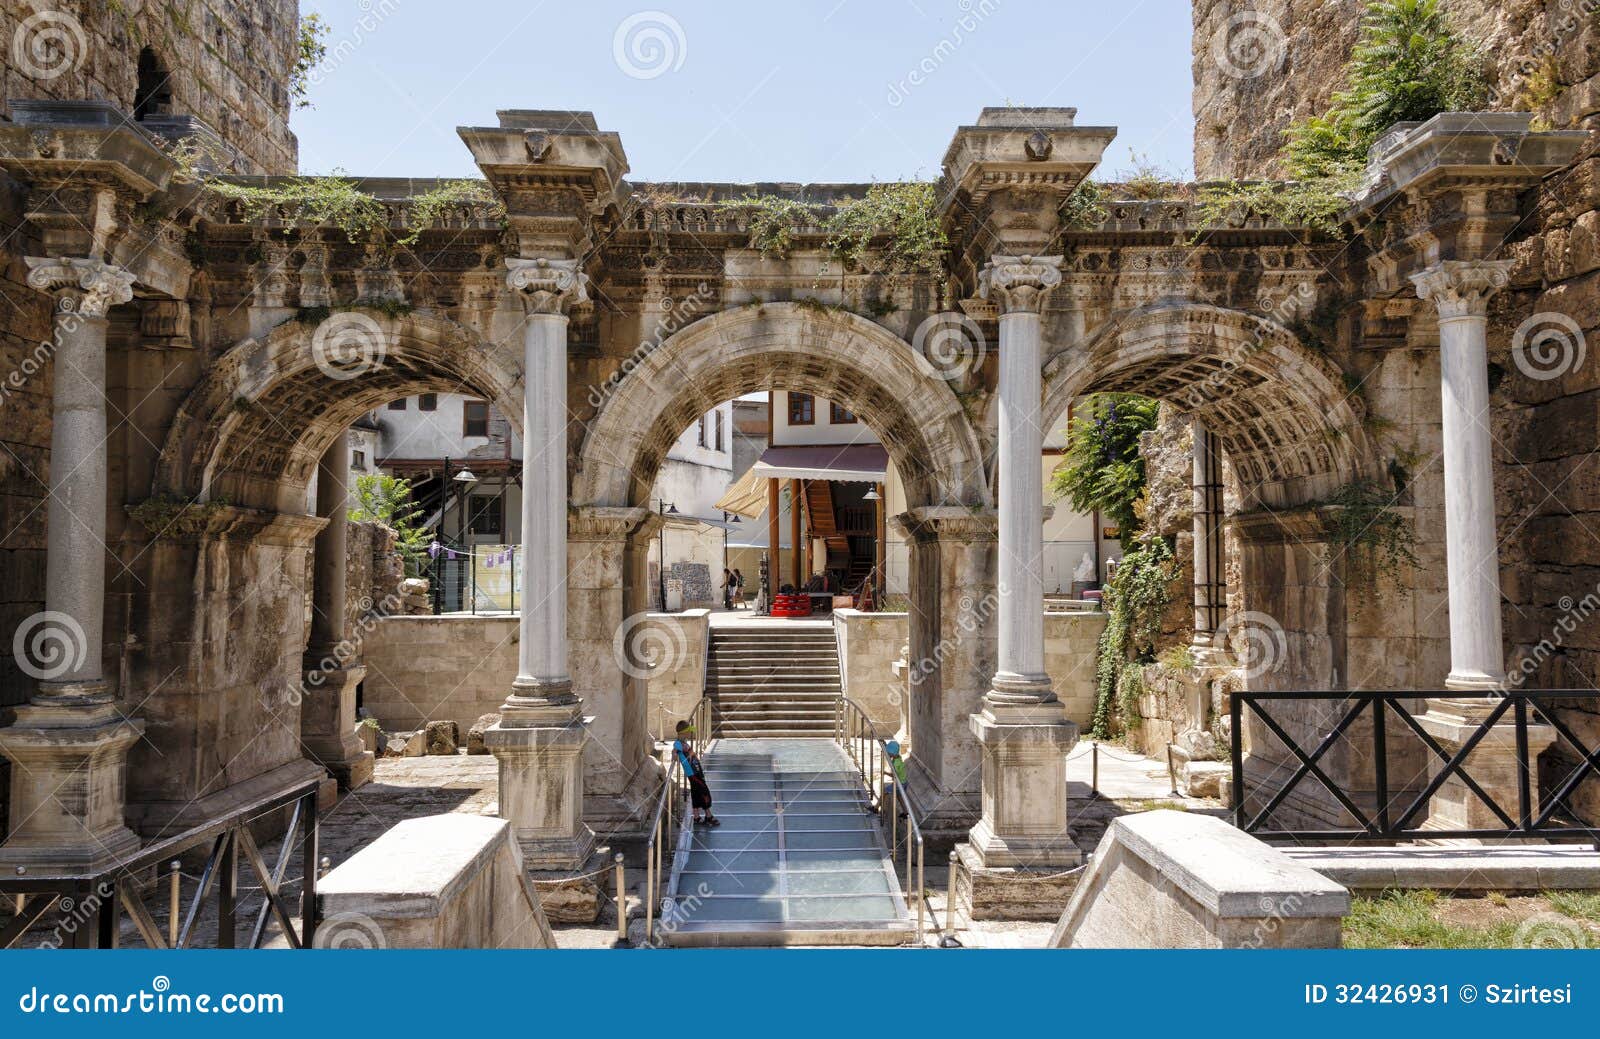 the old town of antalya